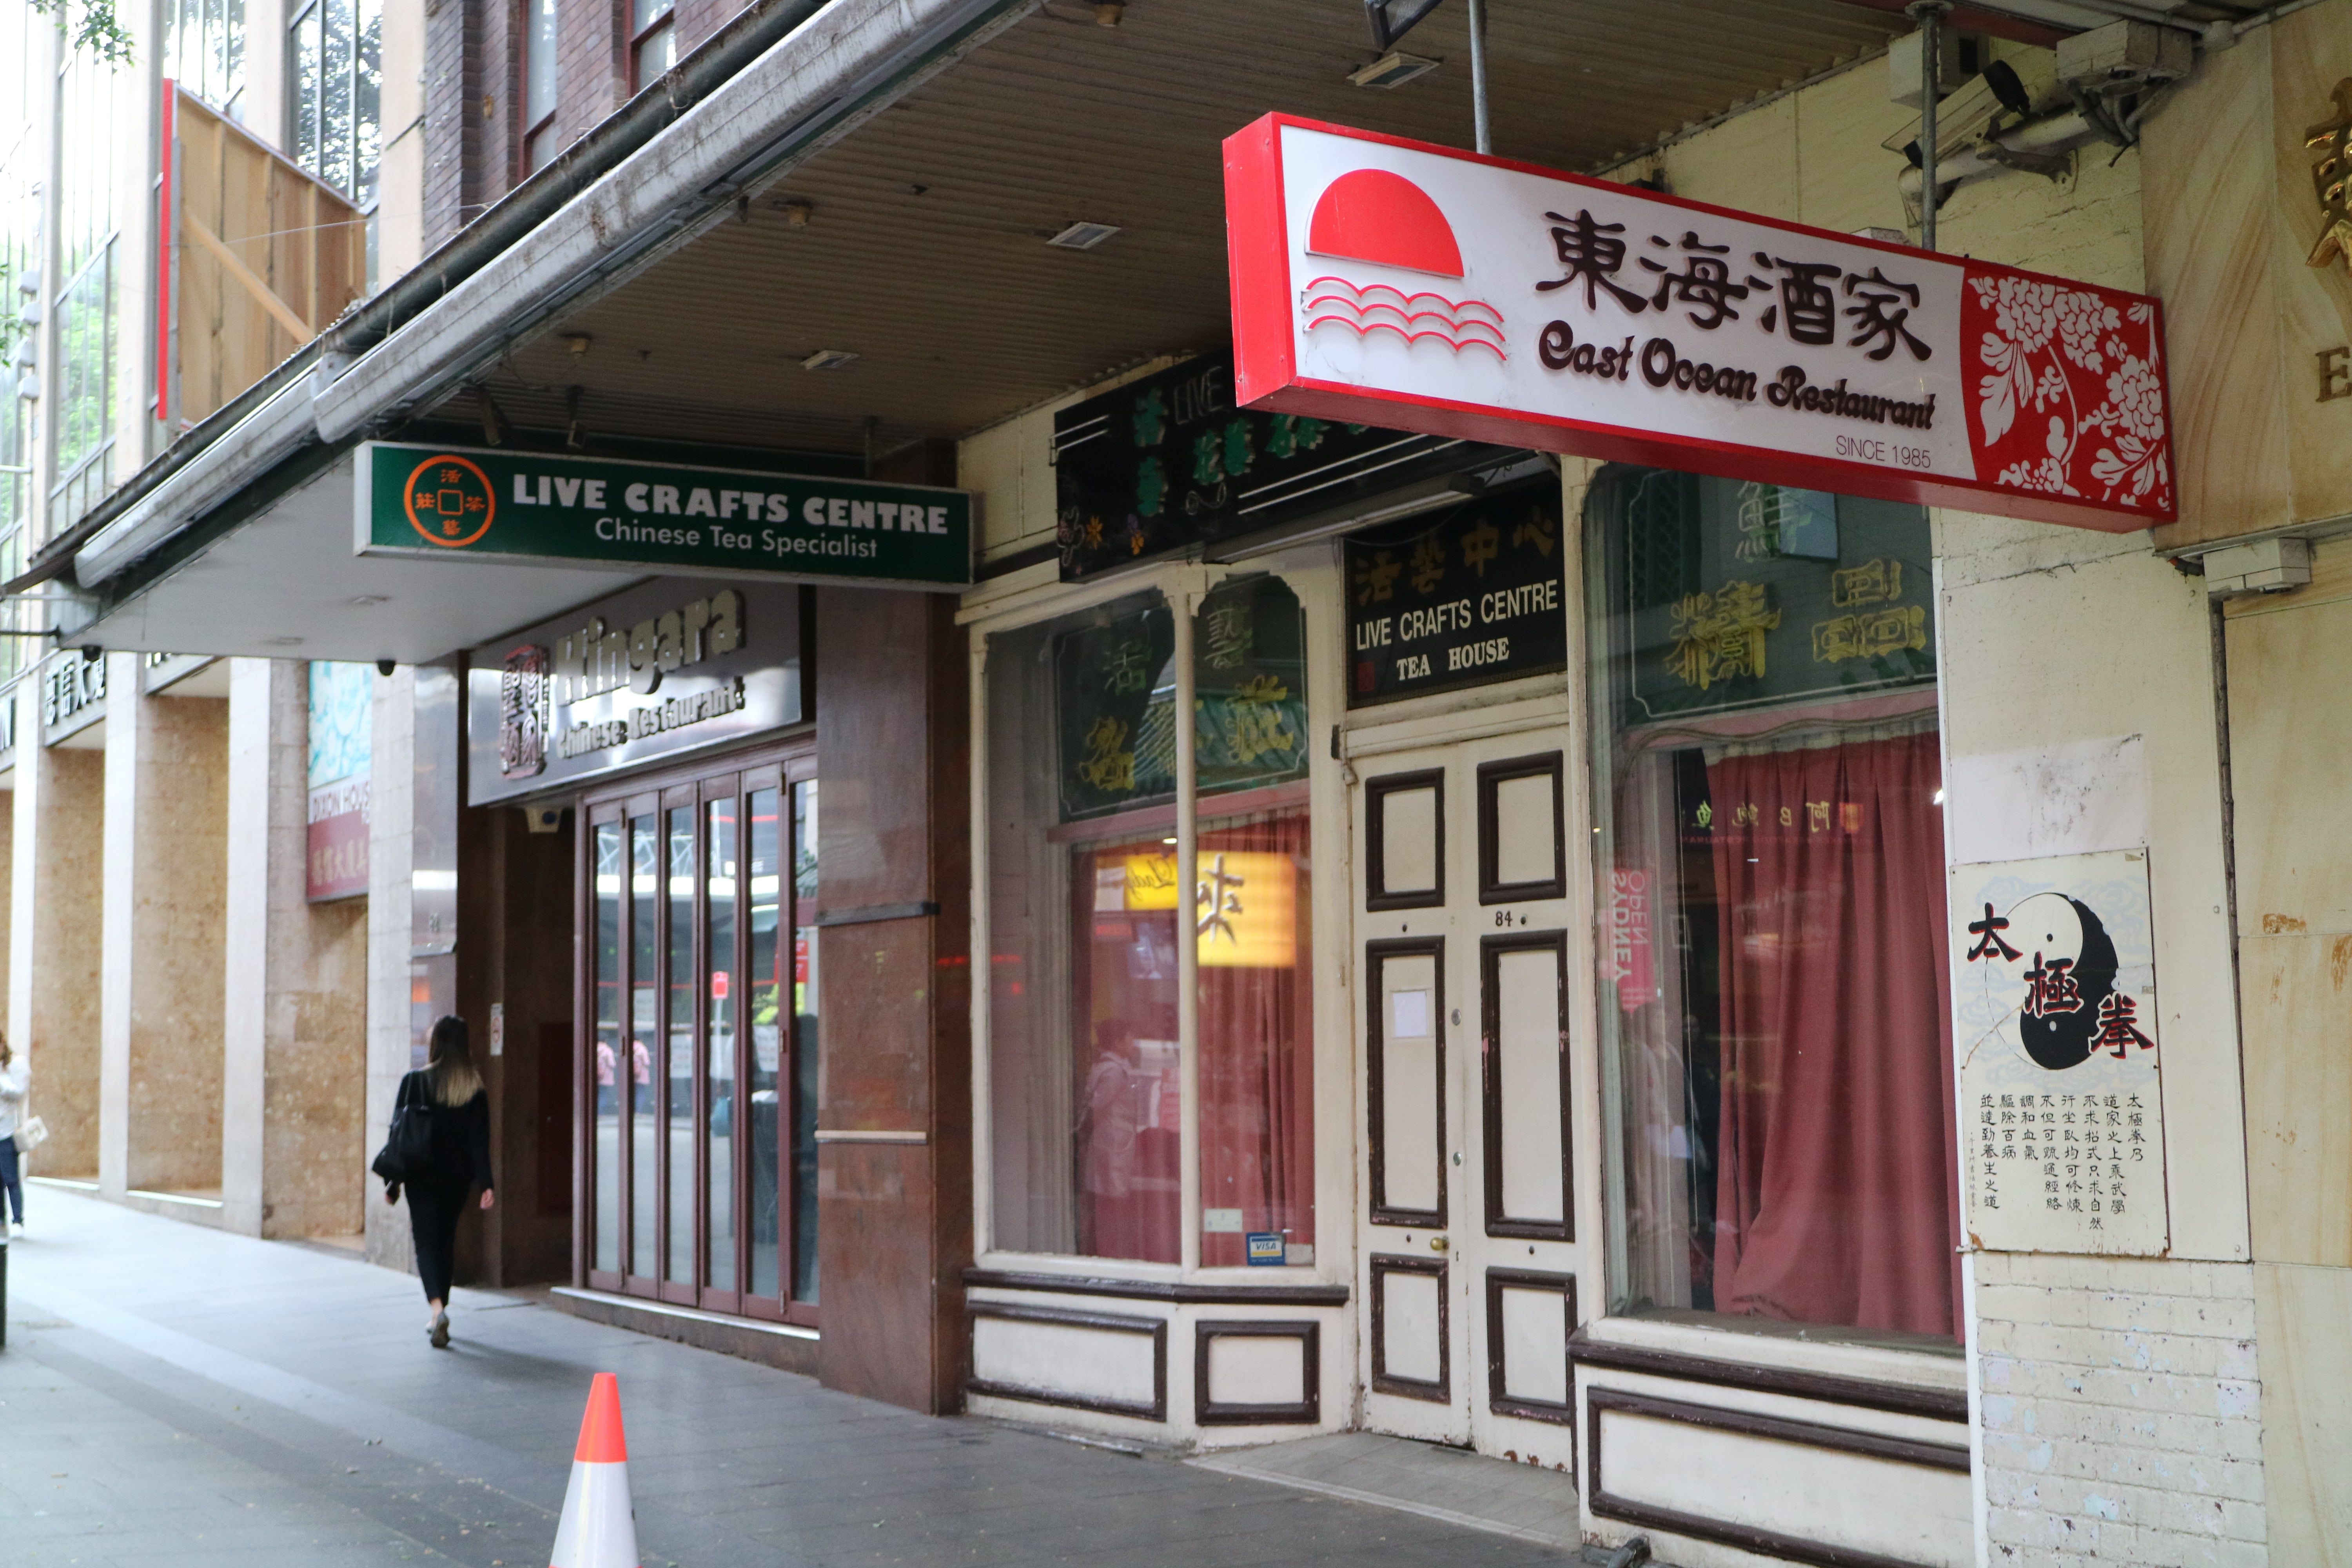 Kowng War Chong formerly located on 82-8 Dixon Street was a clan shop for Zhongshan people in Sydney